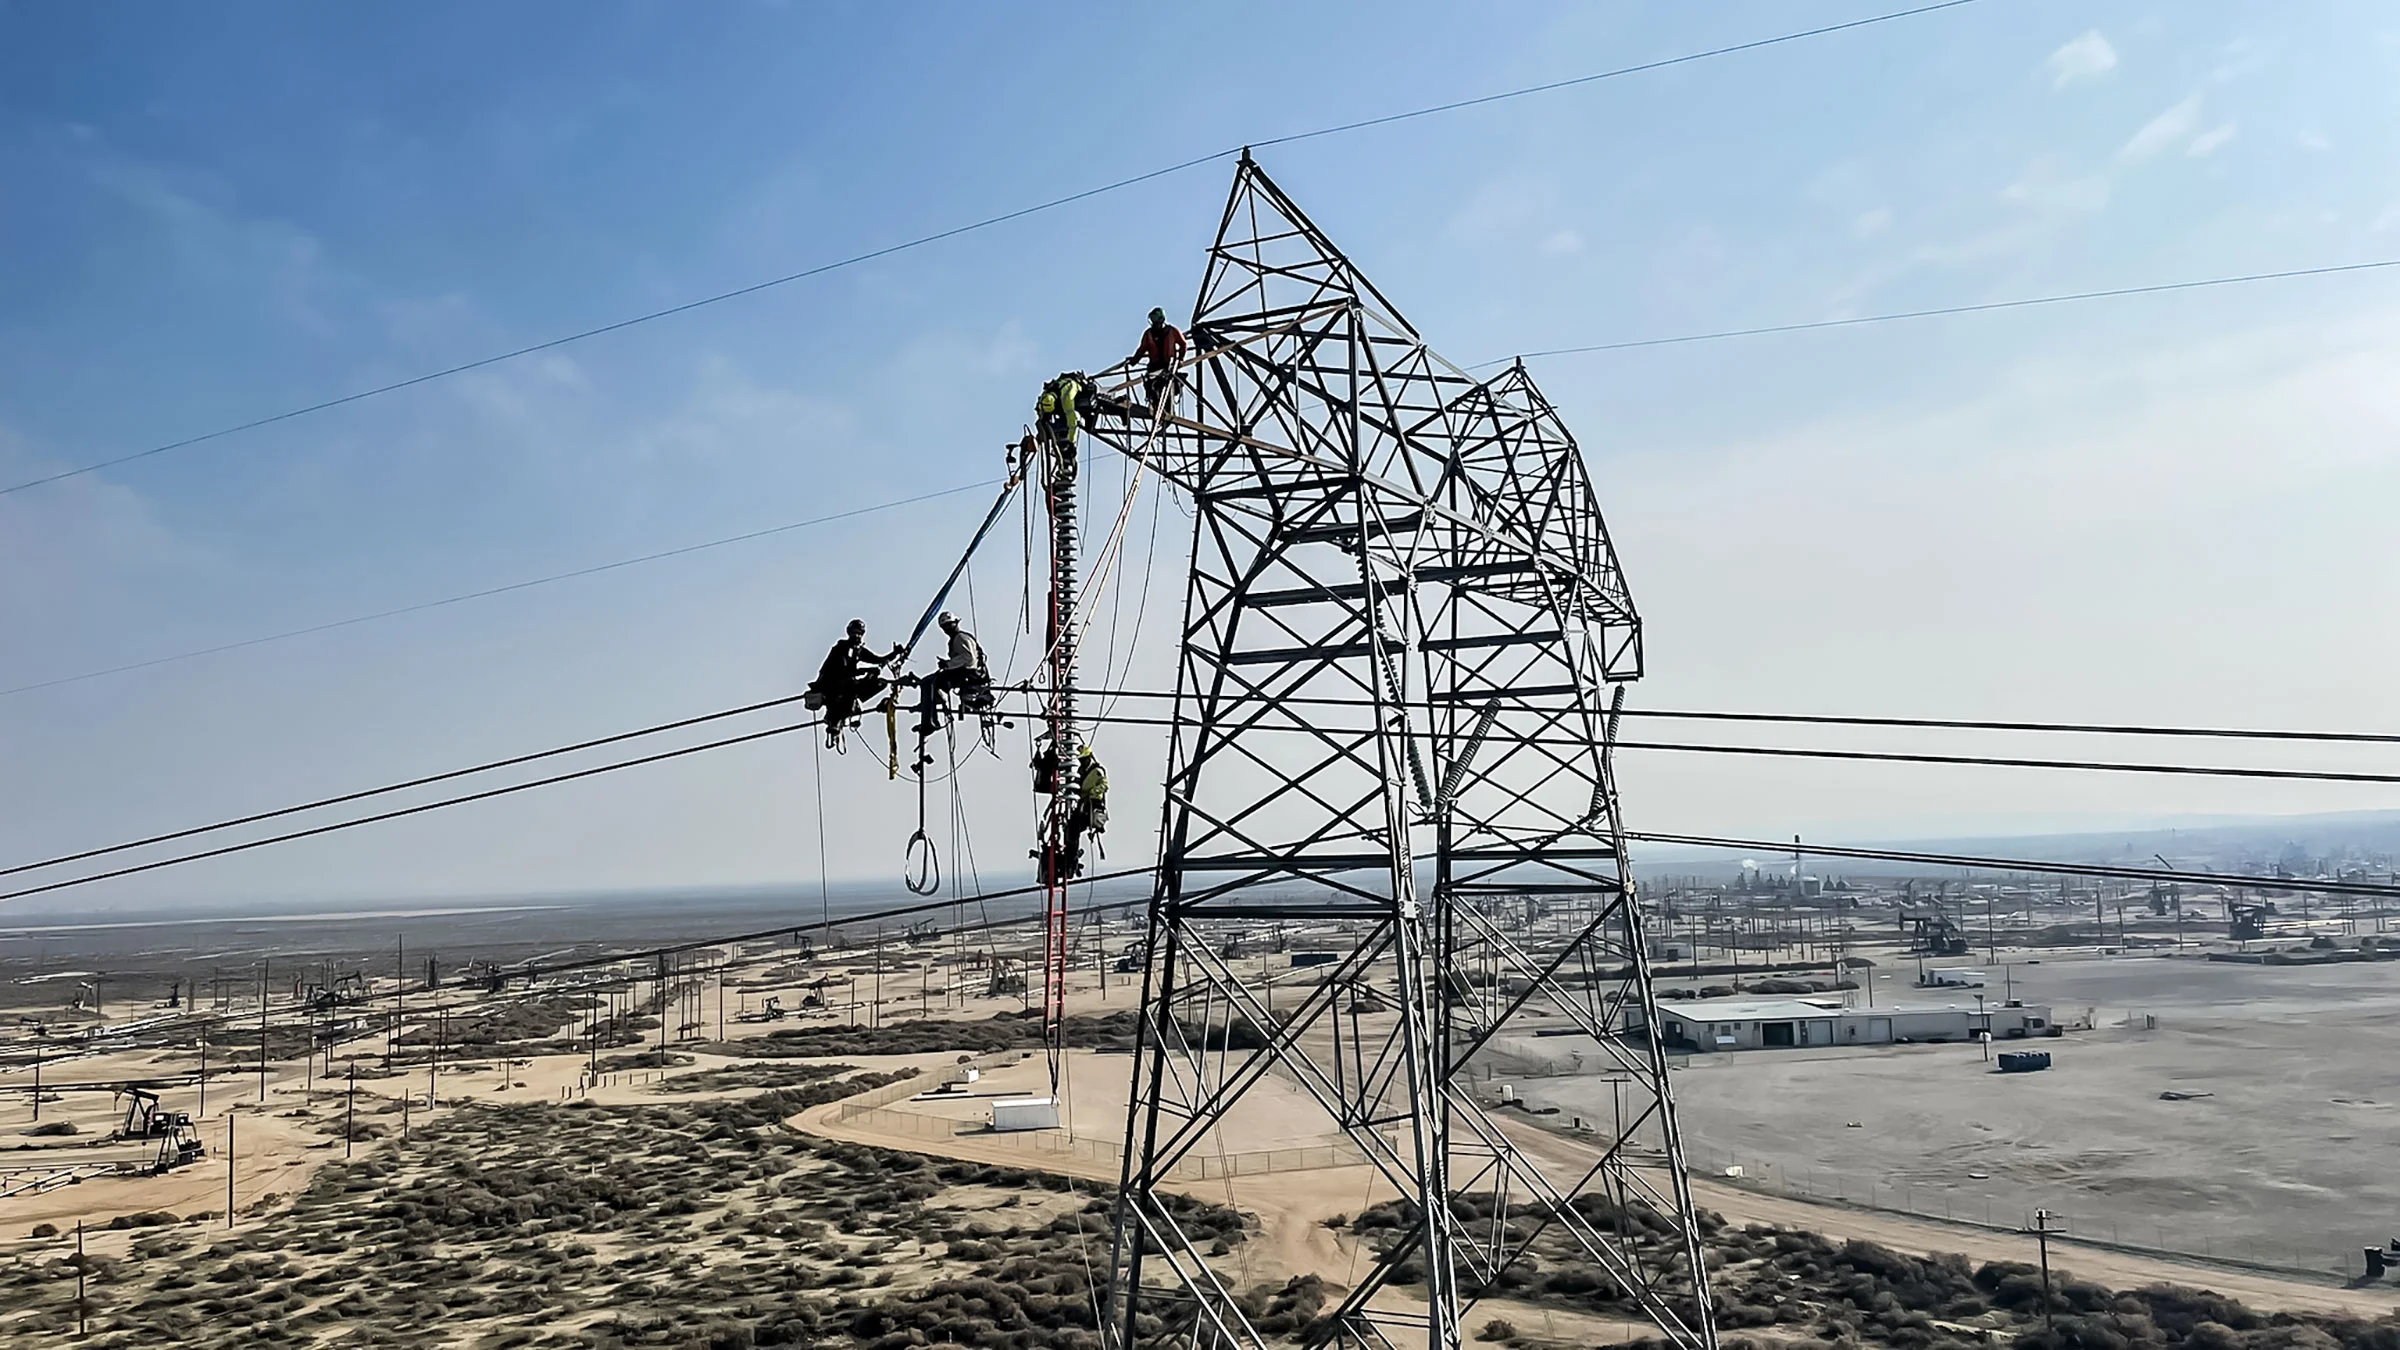 Diablo line workers working high in the air on power